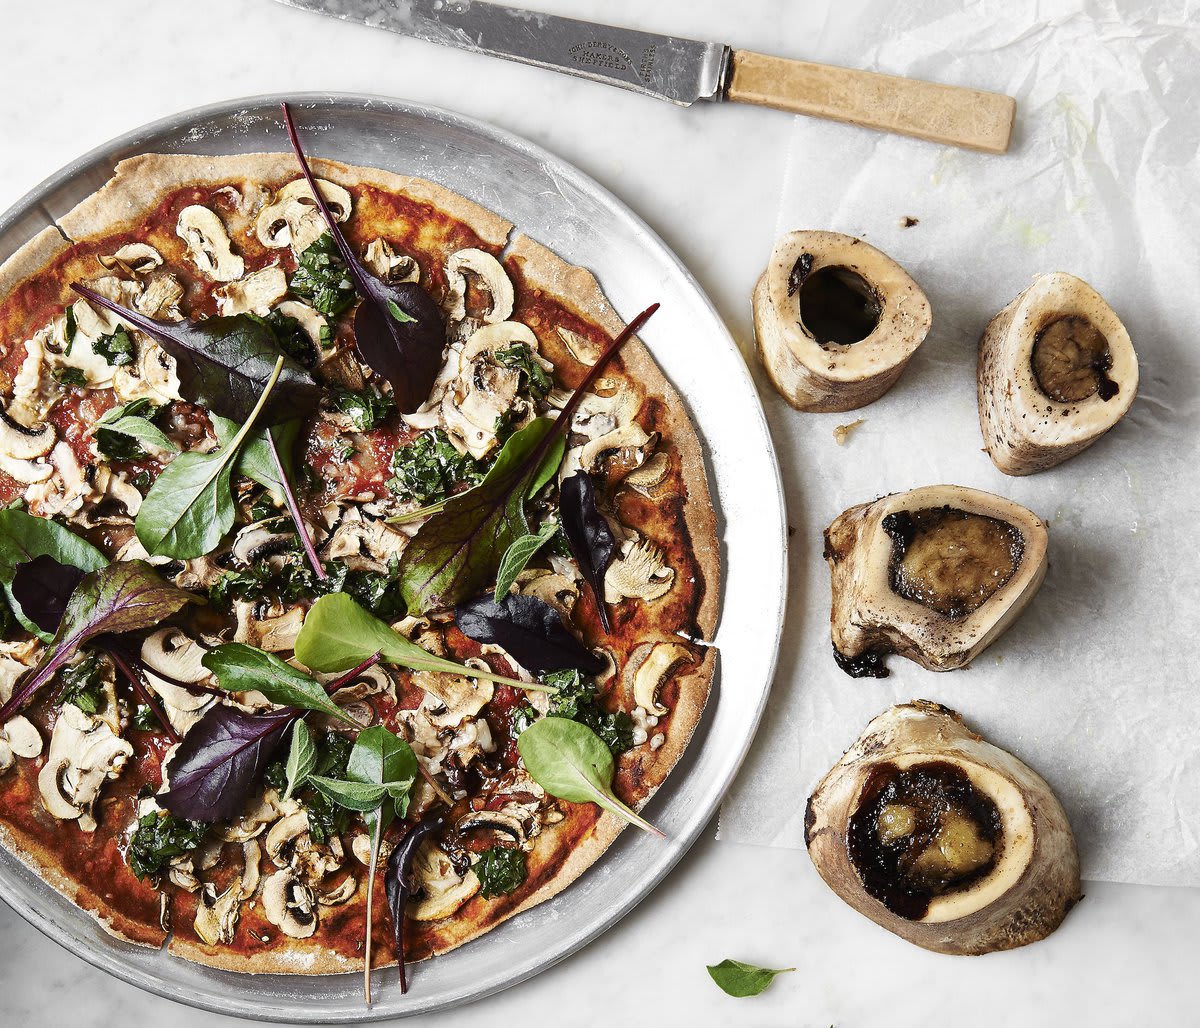 This buckwheat pizza with mushrooms and bone marrow is a meaty addition to your beauty diet.